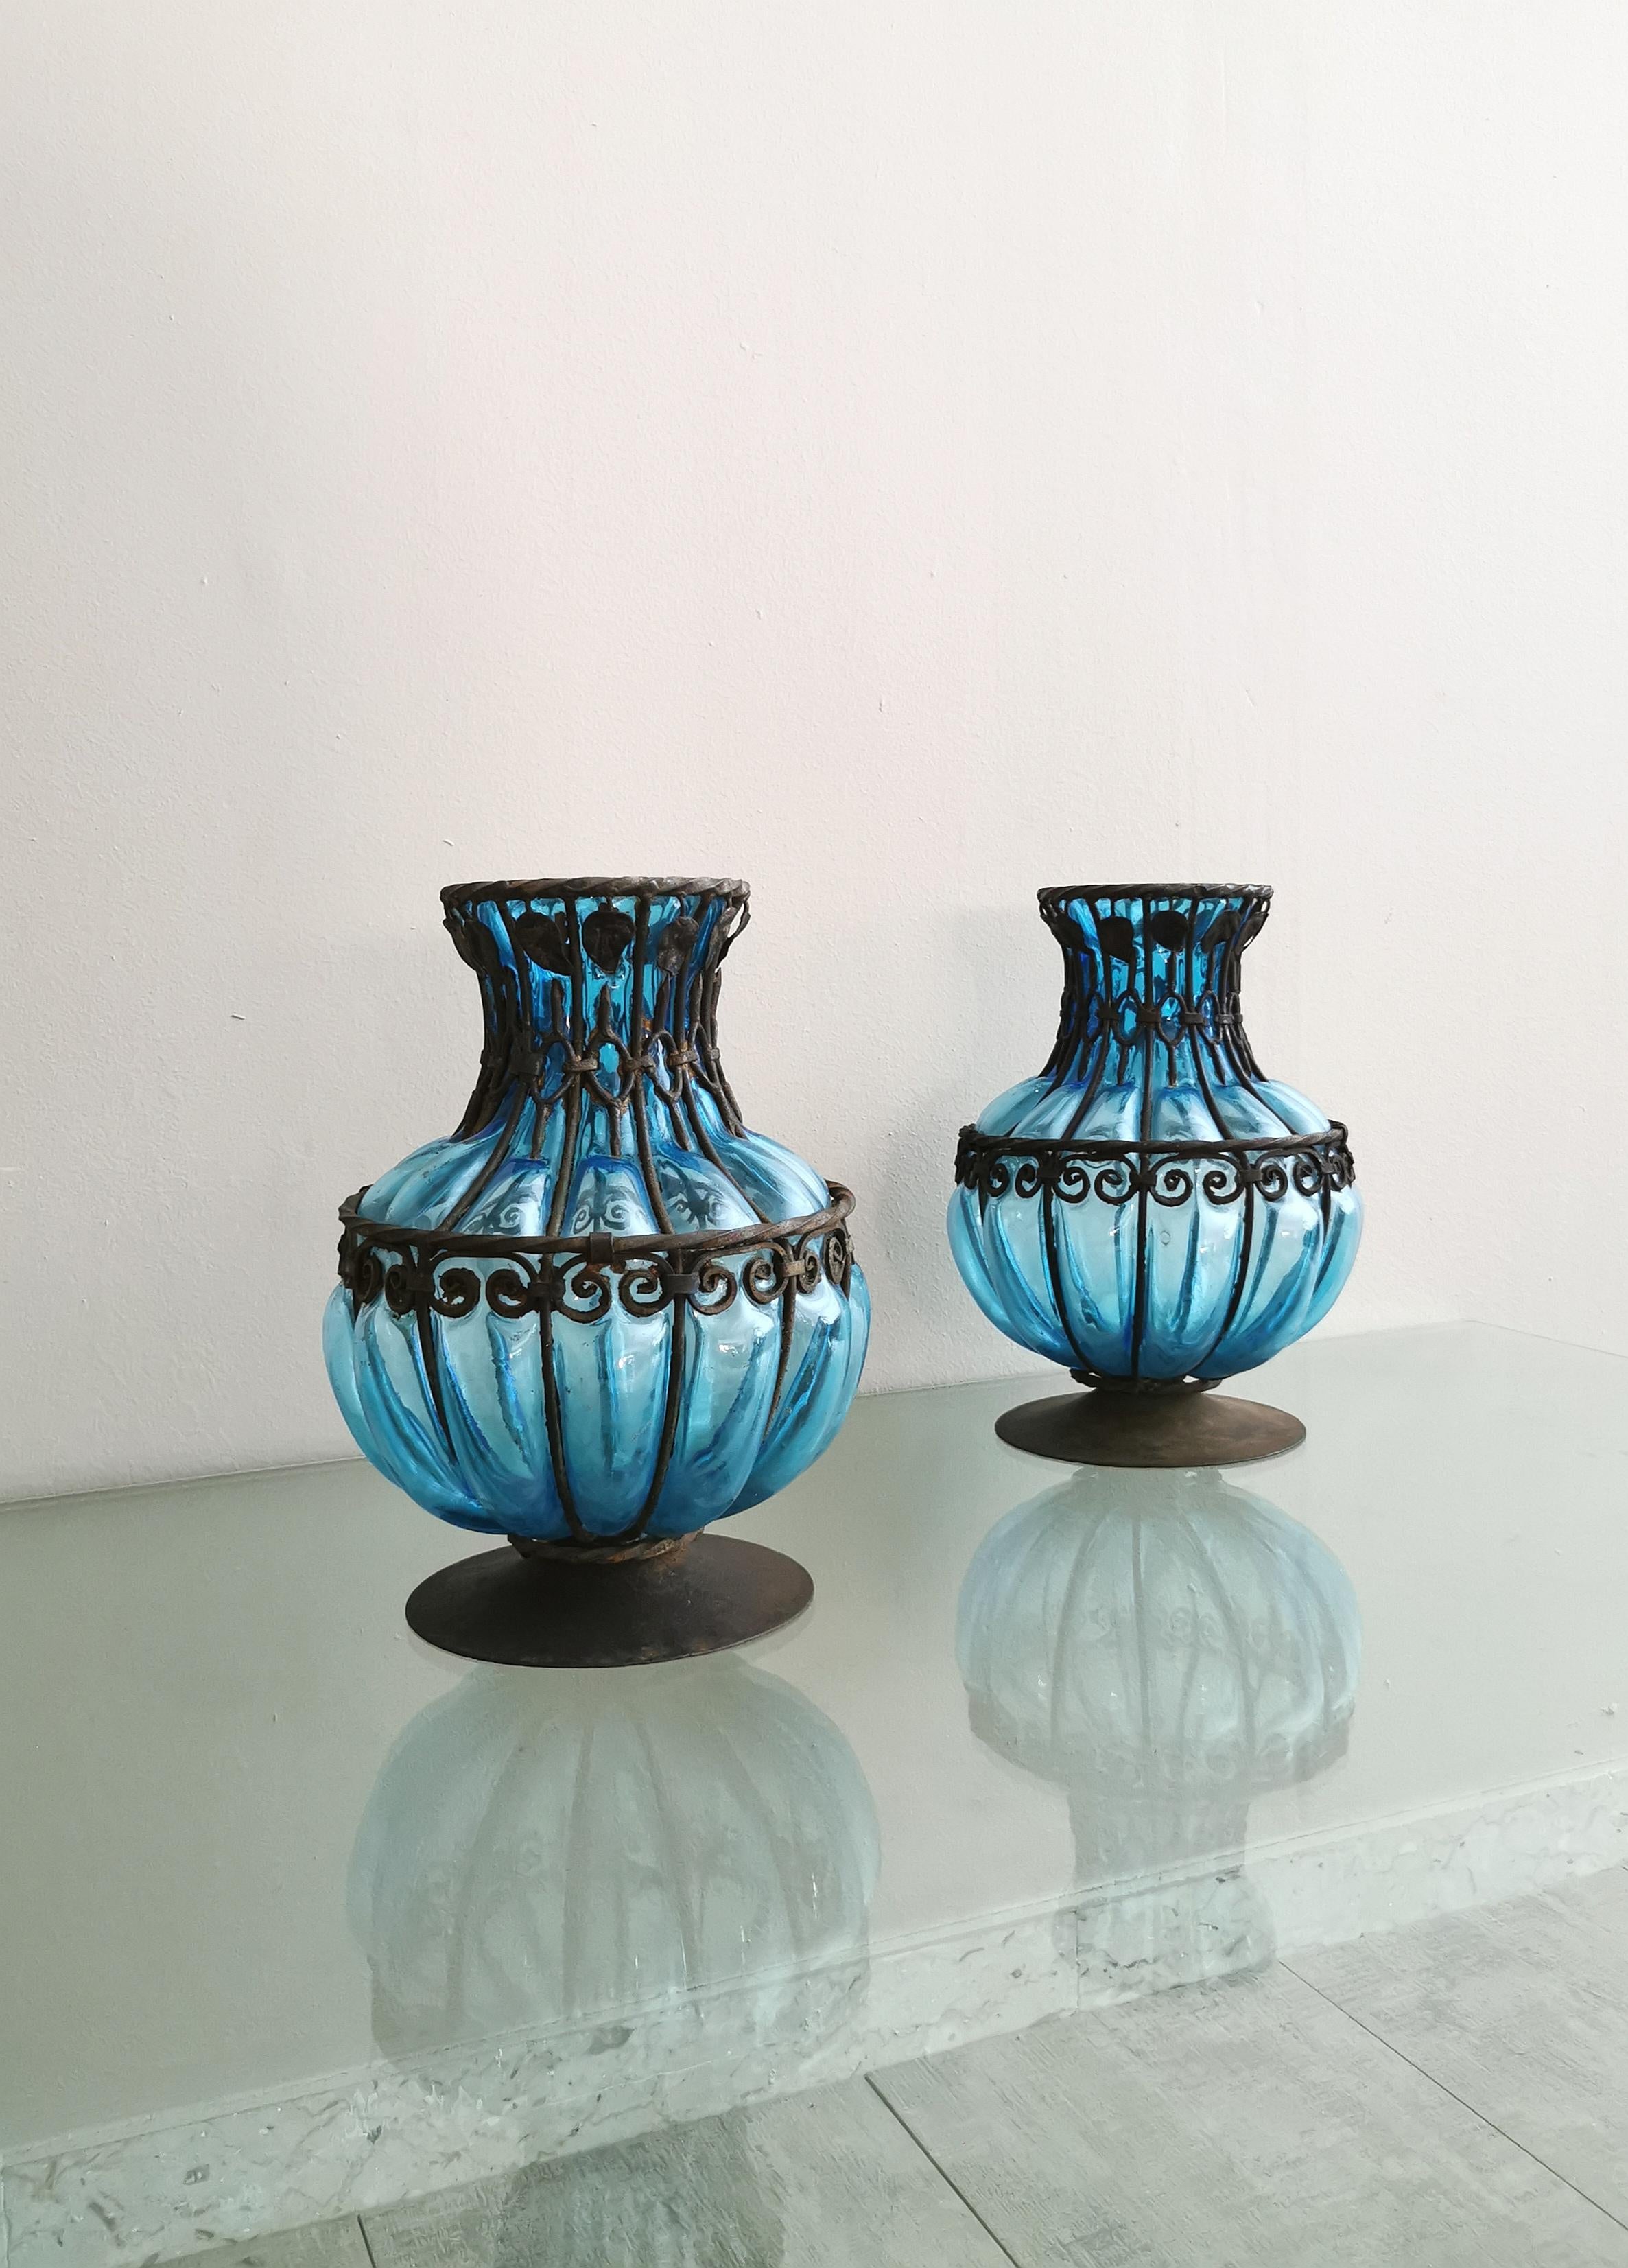 Set of 2 vases made in Italy in the 1980s. Each single vase was made of hand-made Murano glass in the shades of light blue, 